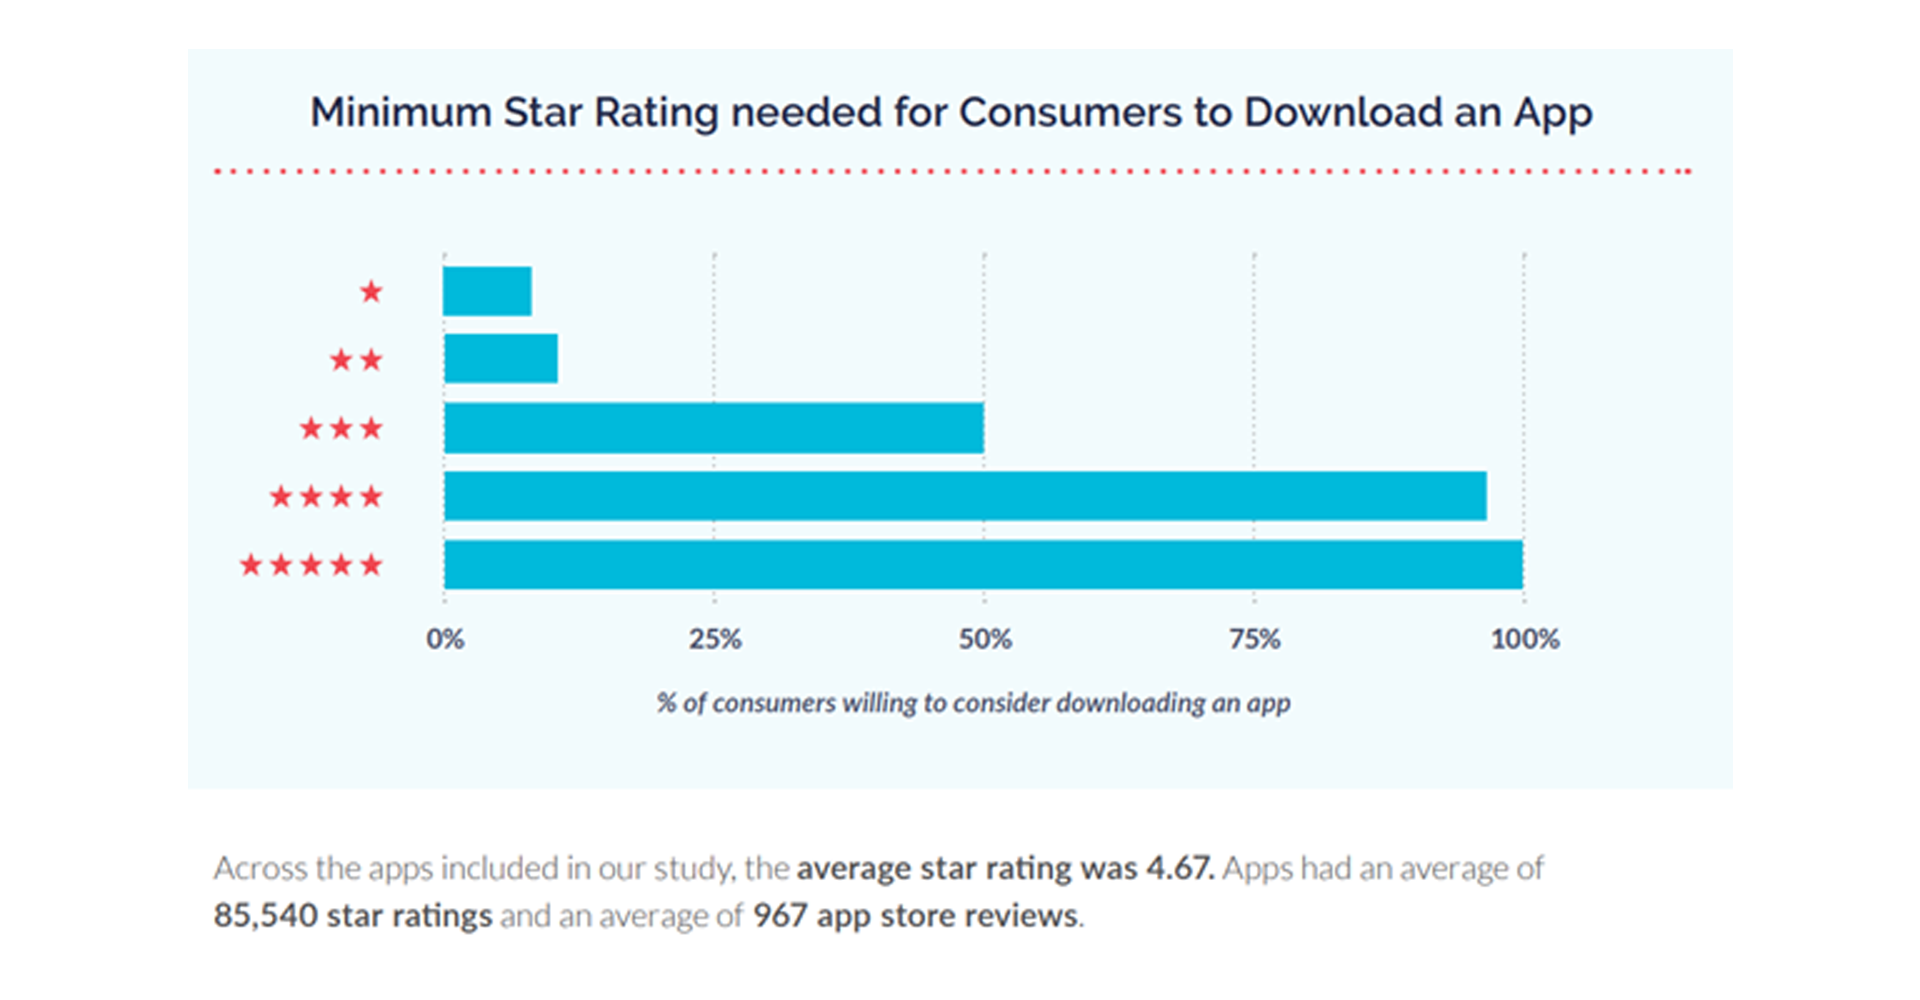 Minimum star rating needed for consumers to download an app